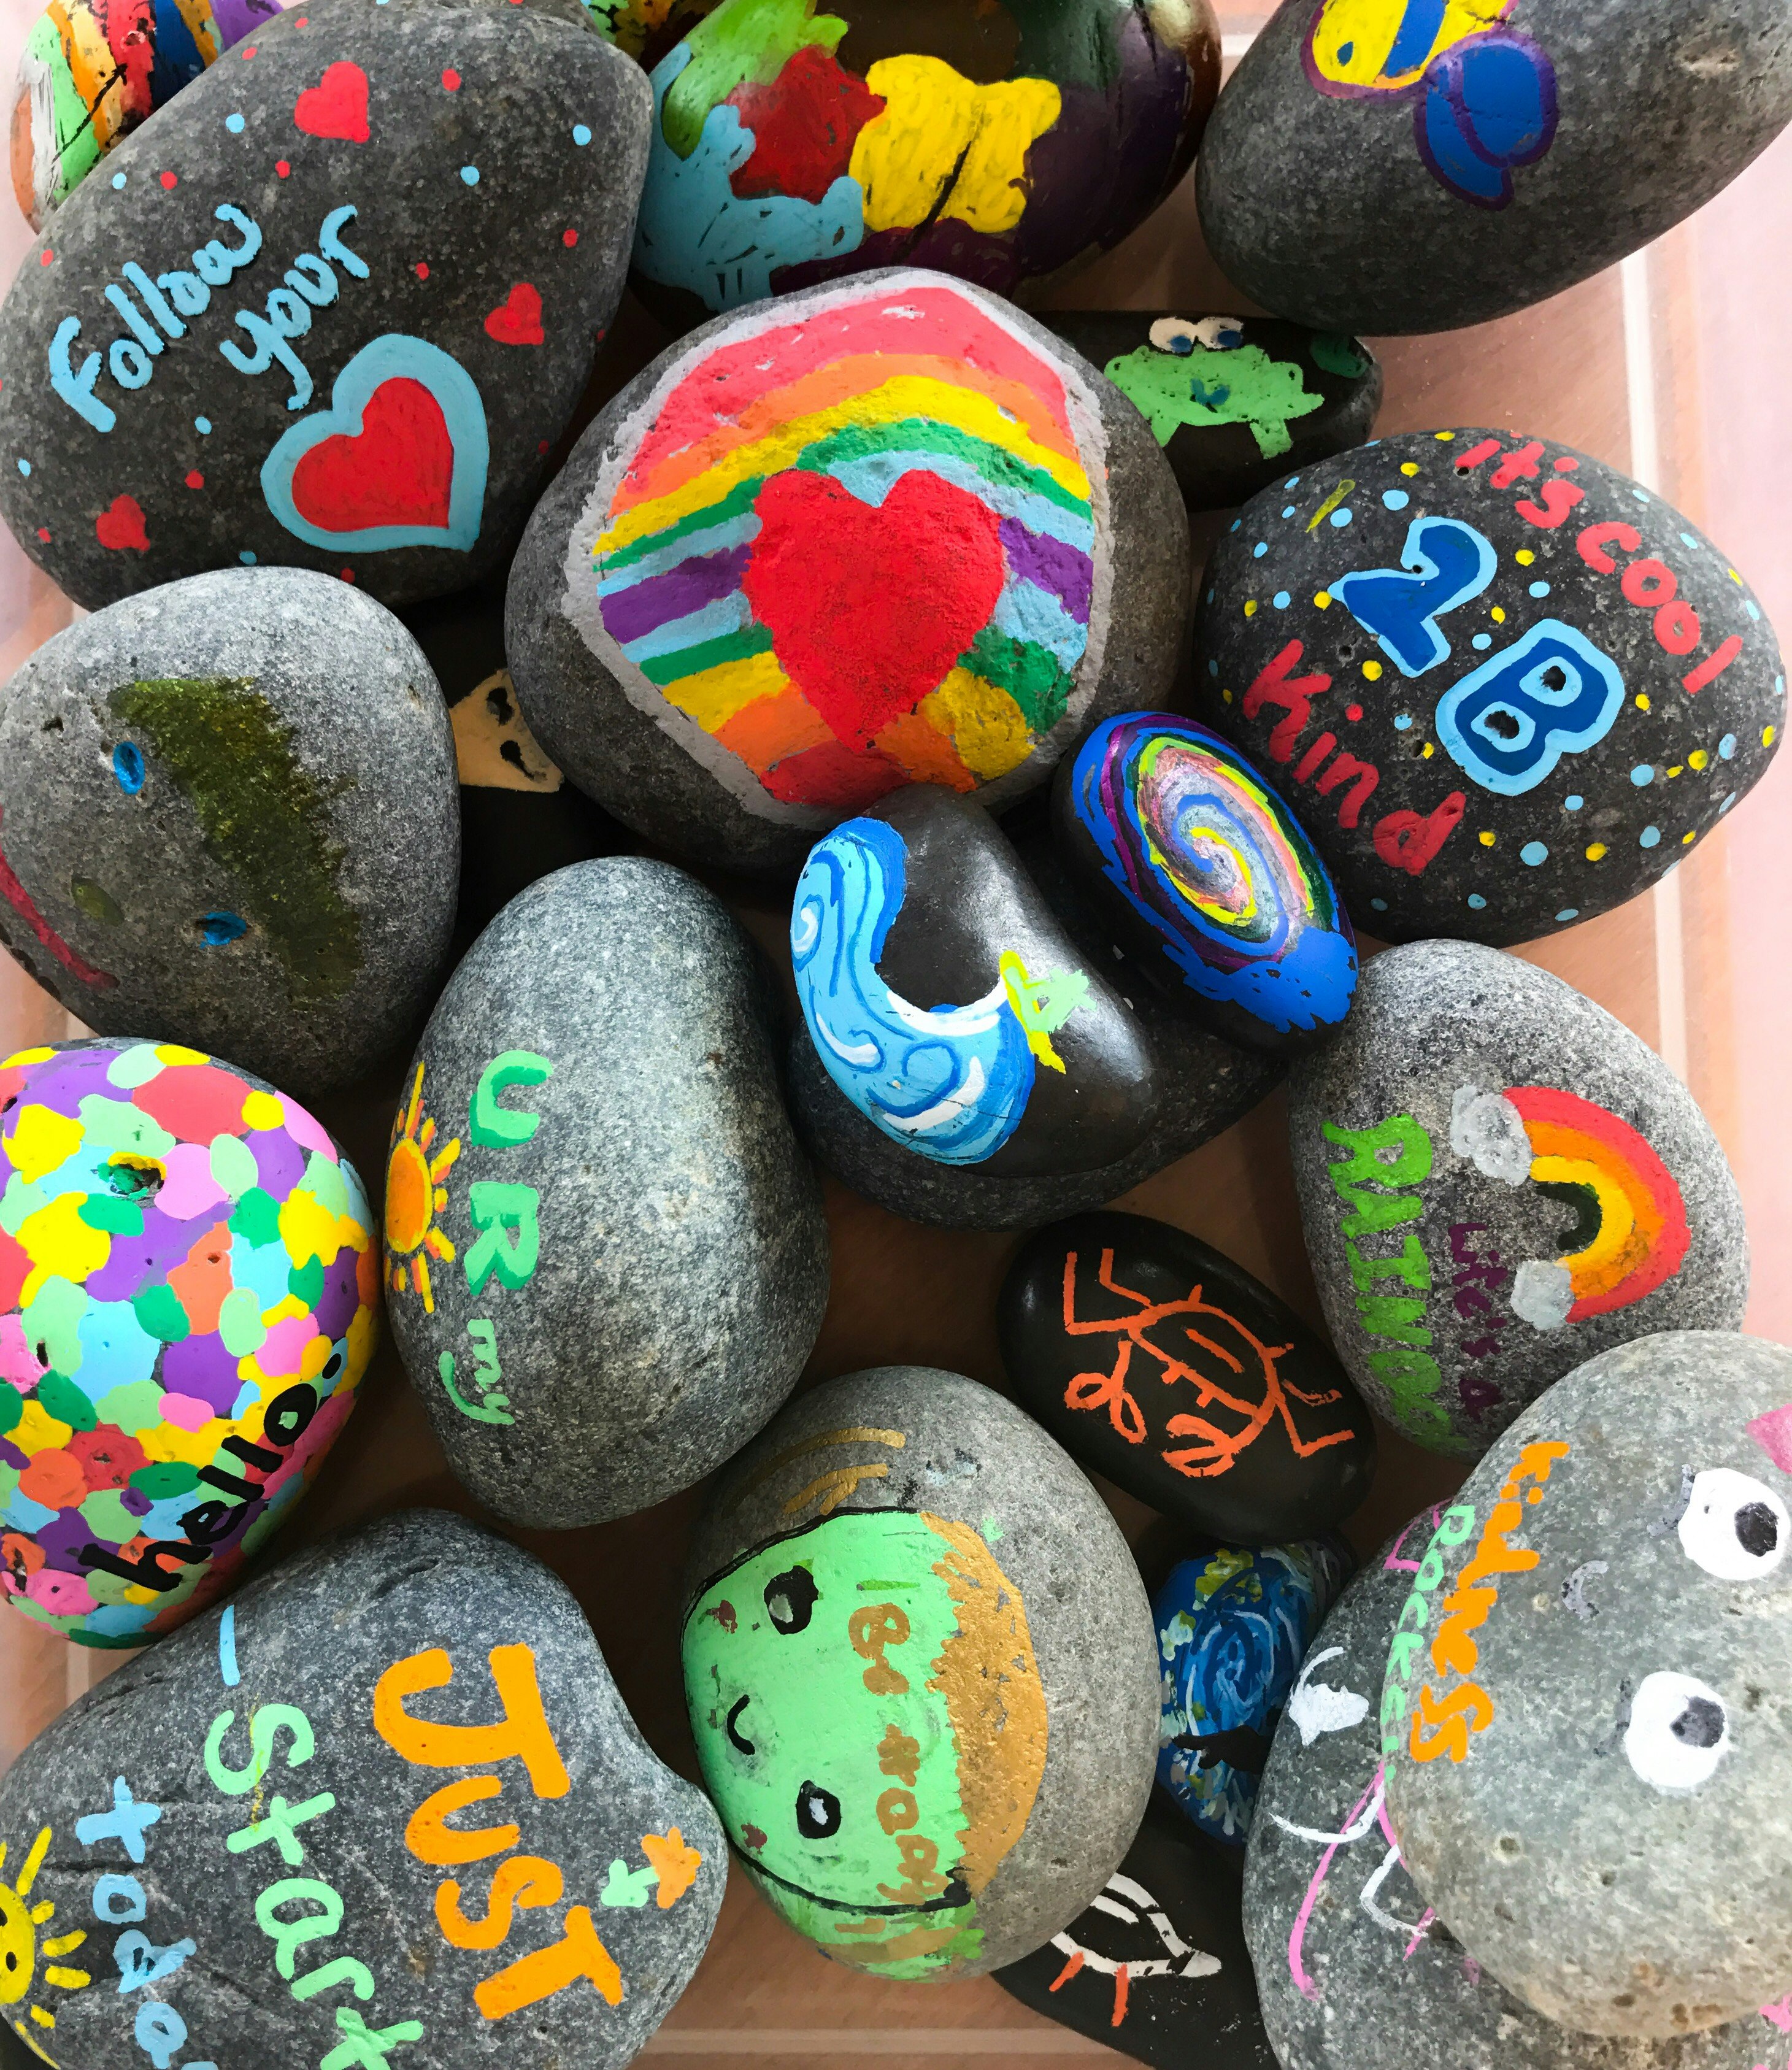 How to paint rocks - Owatrol Direct